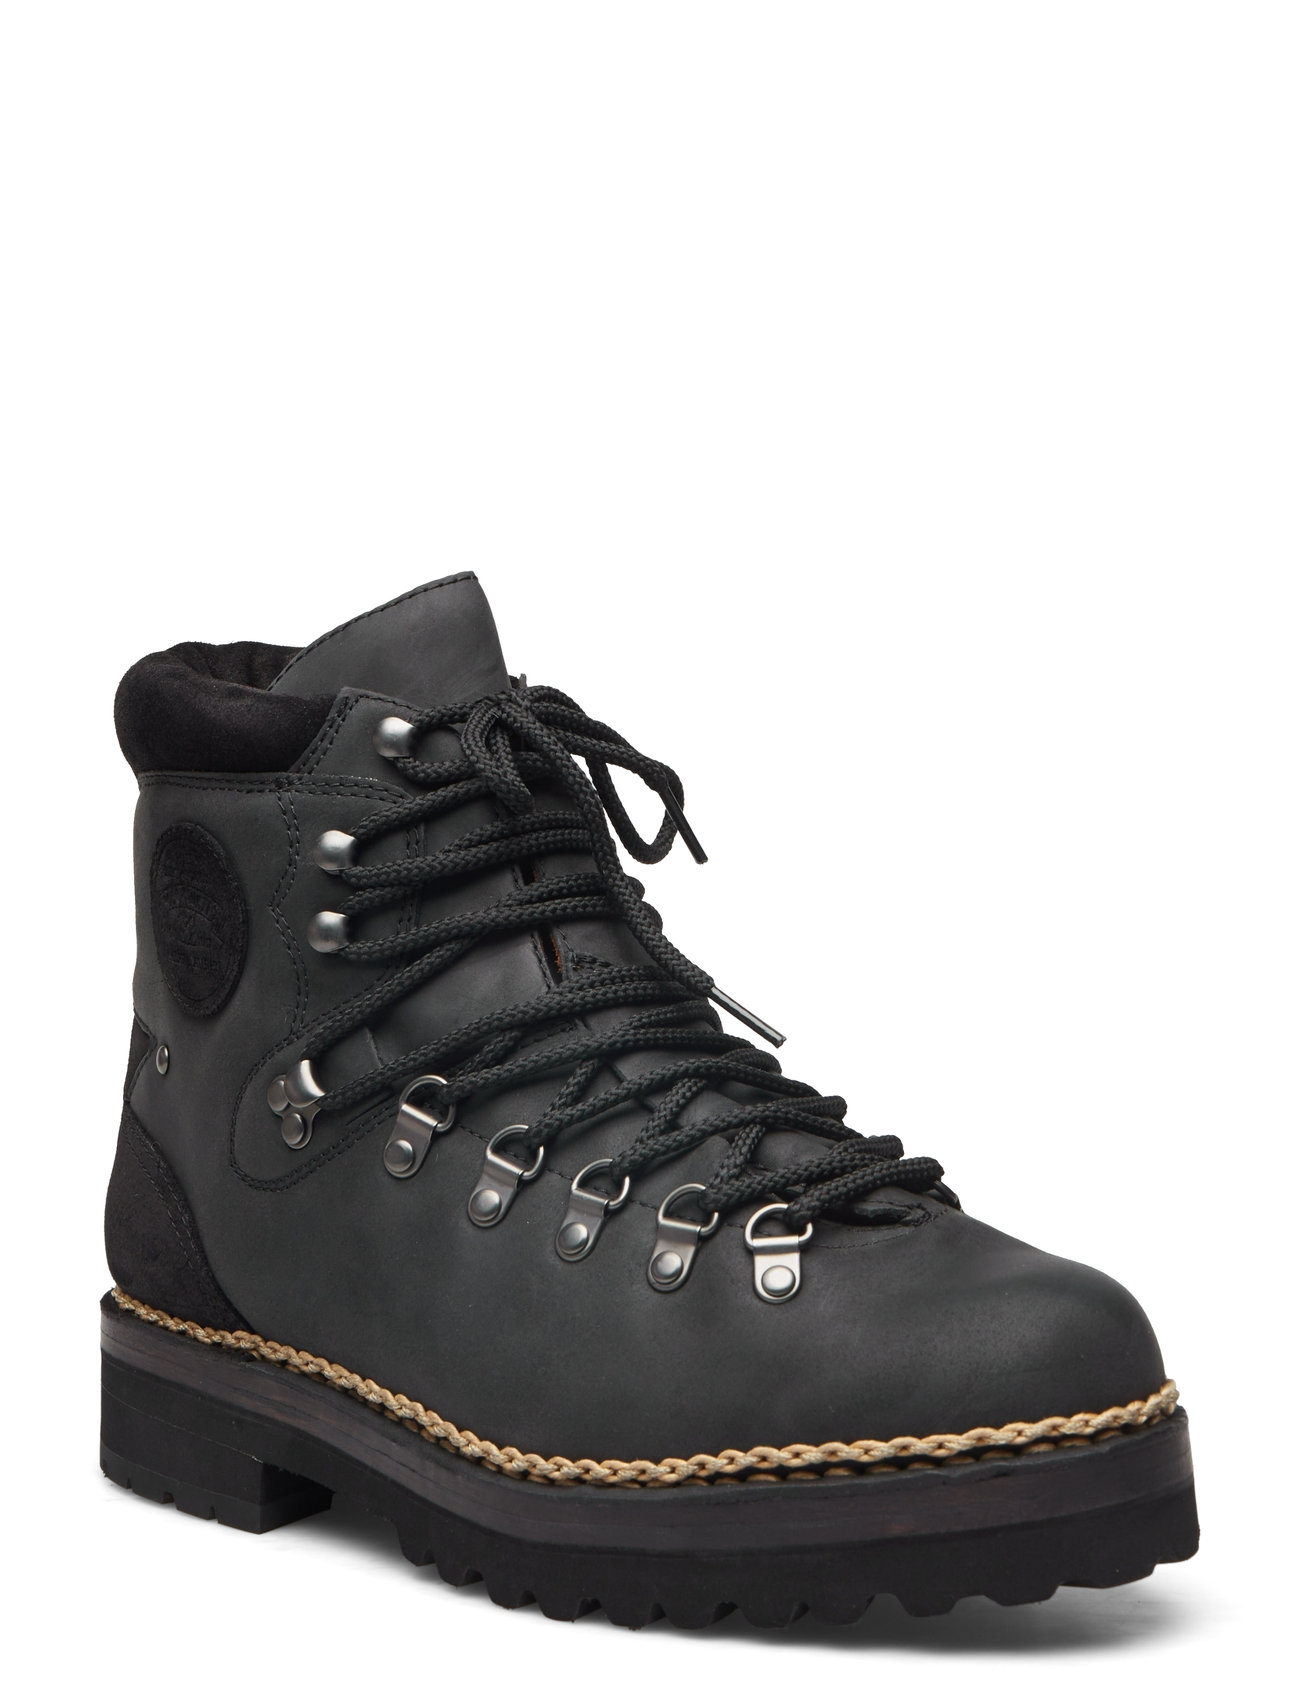 Alpine Leather-Suede Trail Boot Shoes Boots Winter Boots Black Polo Ralph Lauren